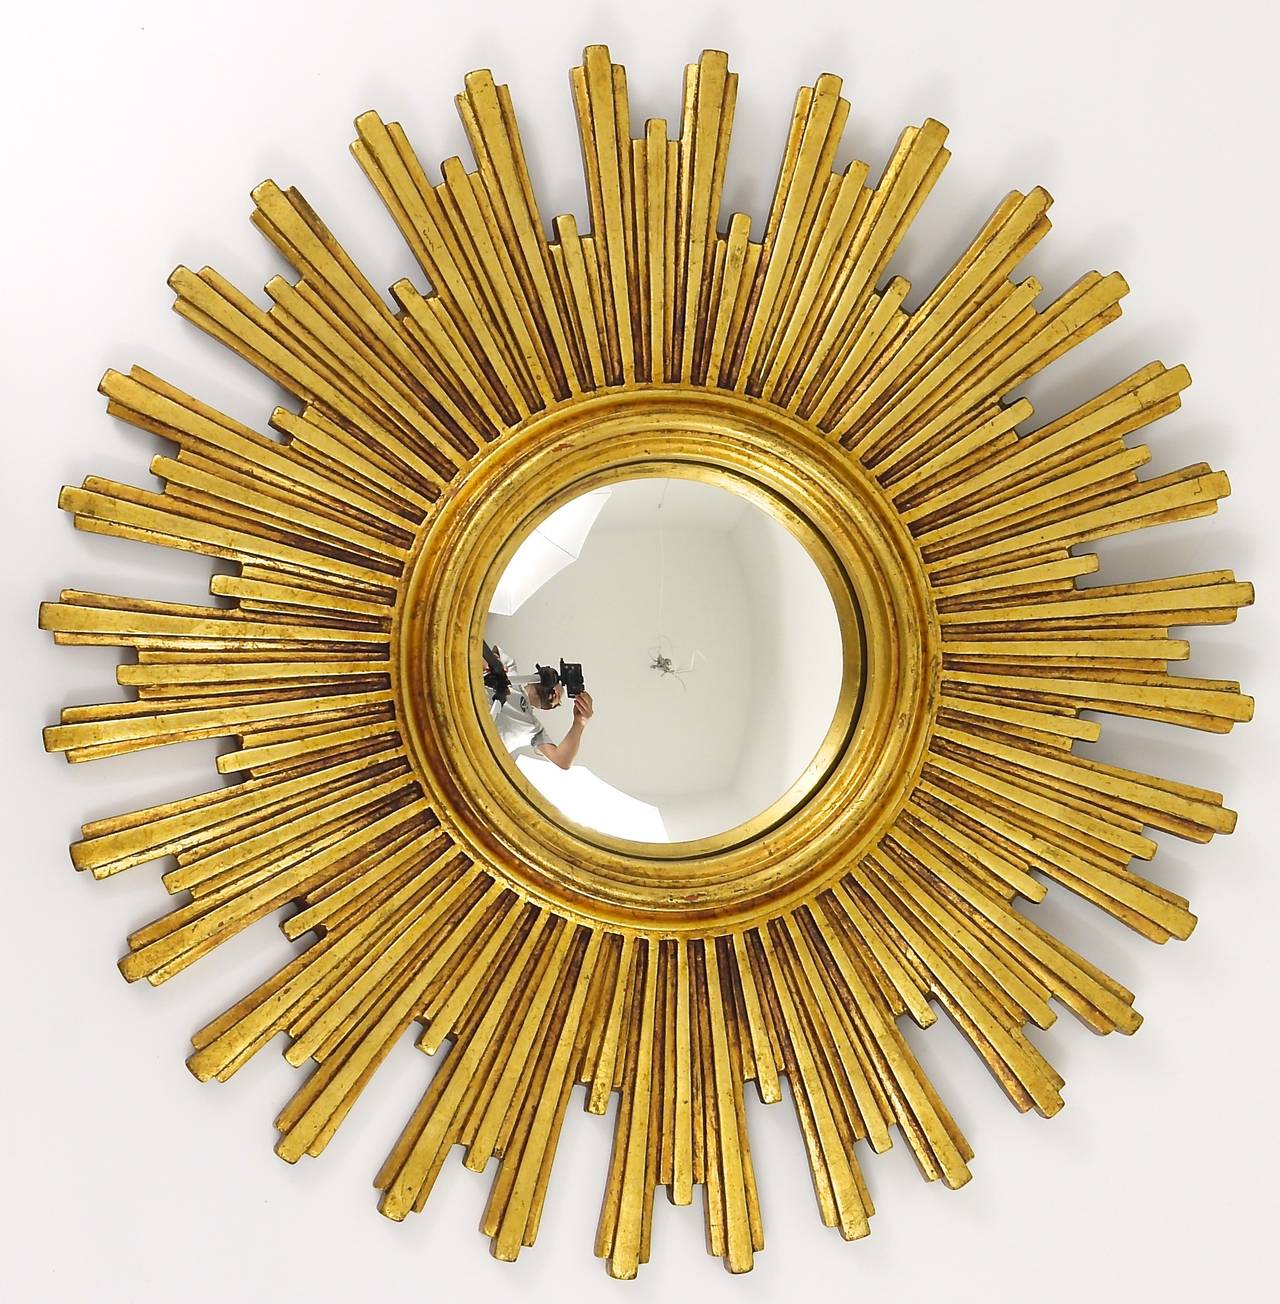 One of two beautiful and big sunburst/starburst gilt wall mirror with convex mirror glass from France, dated around 1950. A very beautiful and decorative object in very good condition. Diameter 22